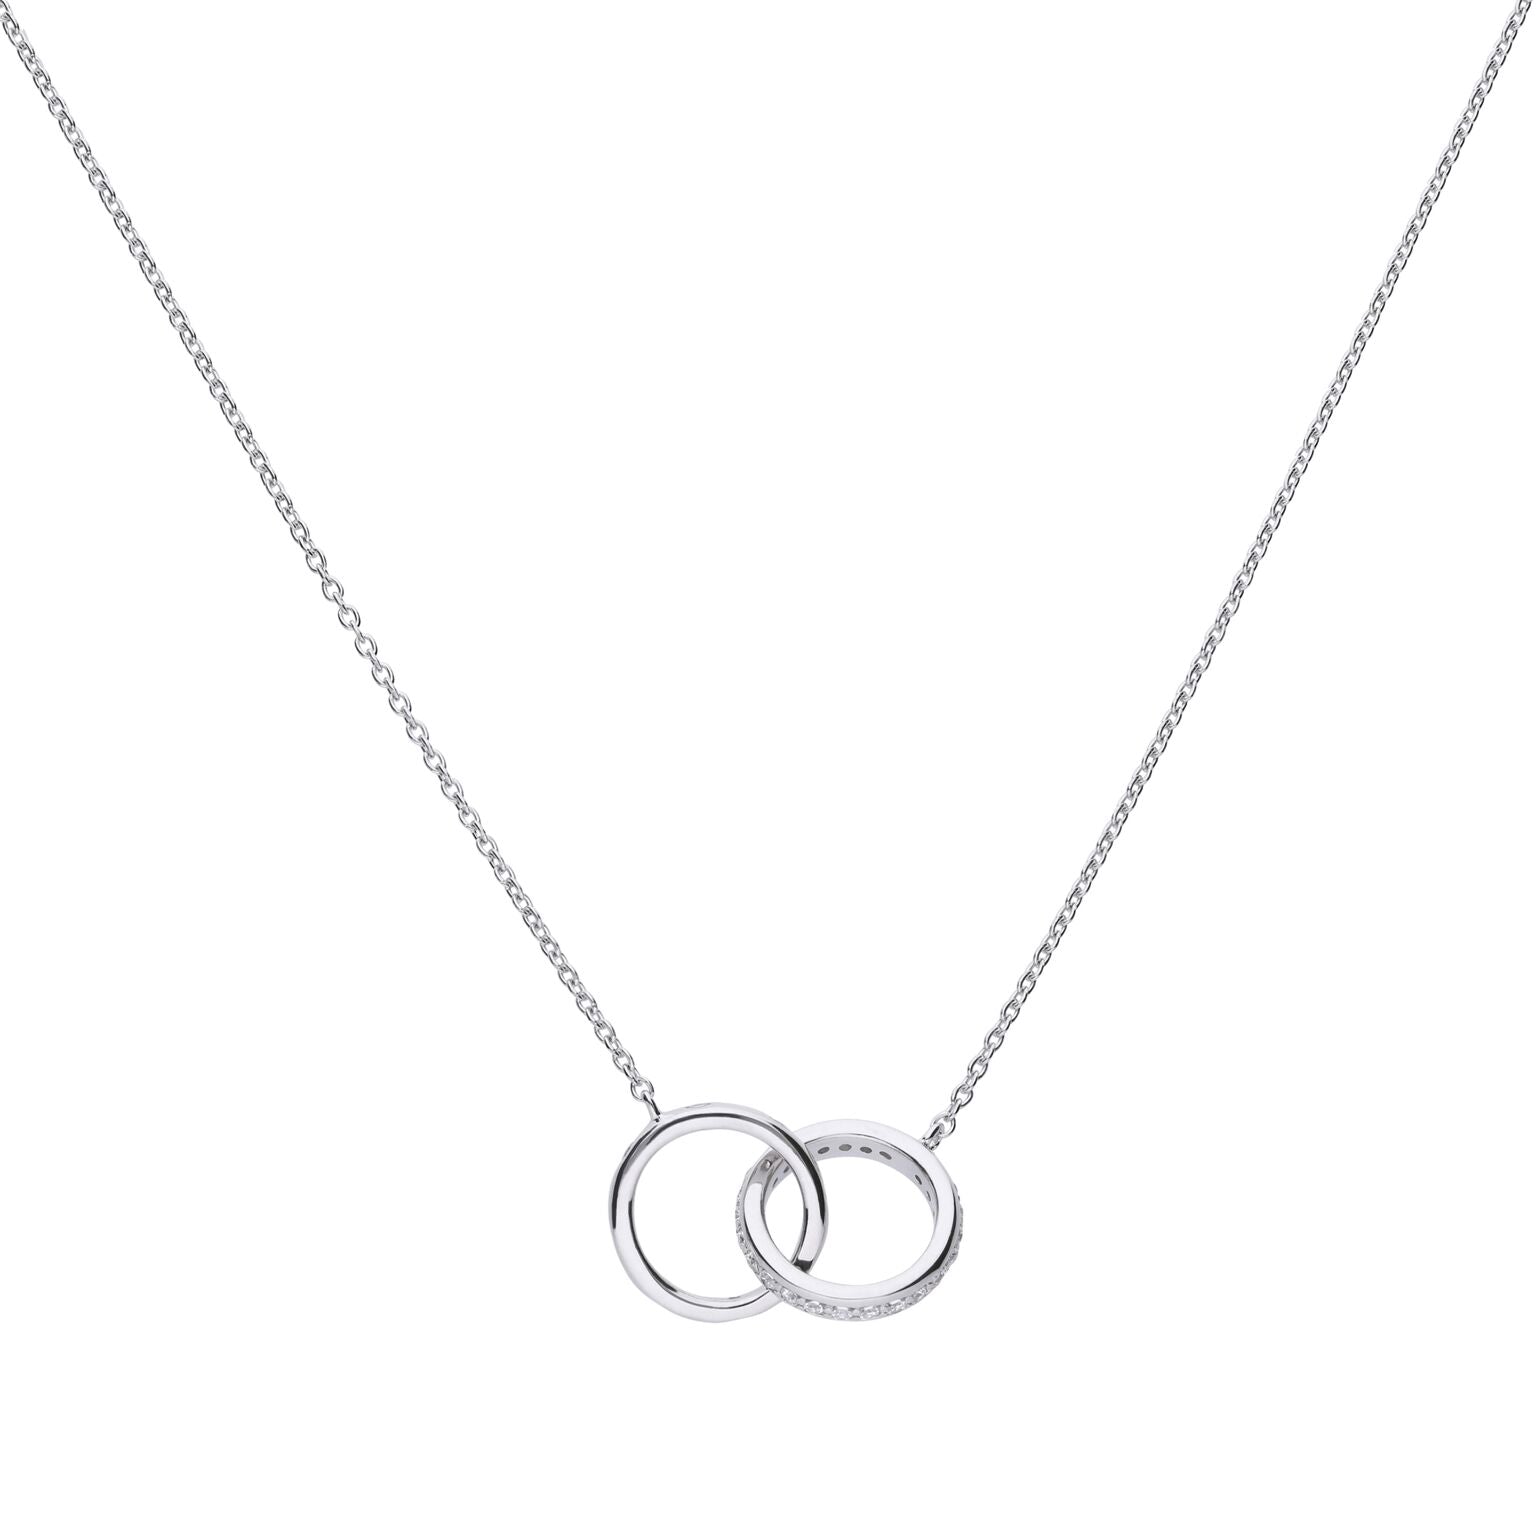 Interlocking Circles Necklace with Diamonds Sterling Silver | Kay Outlet